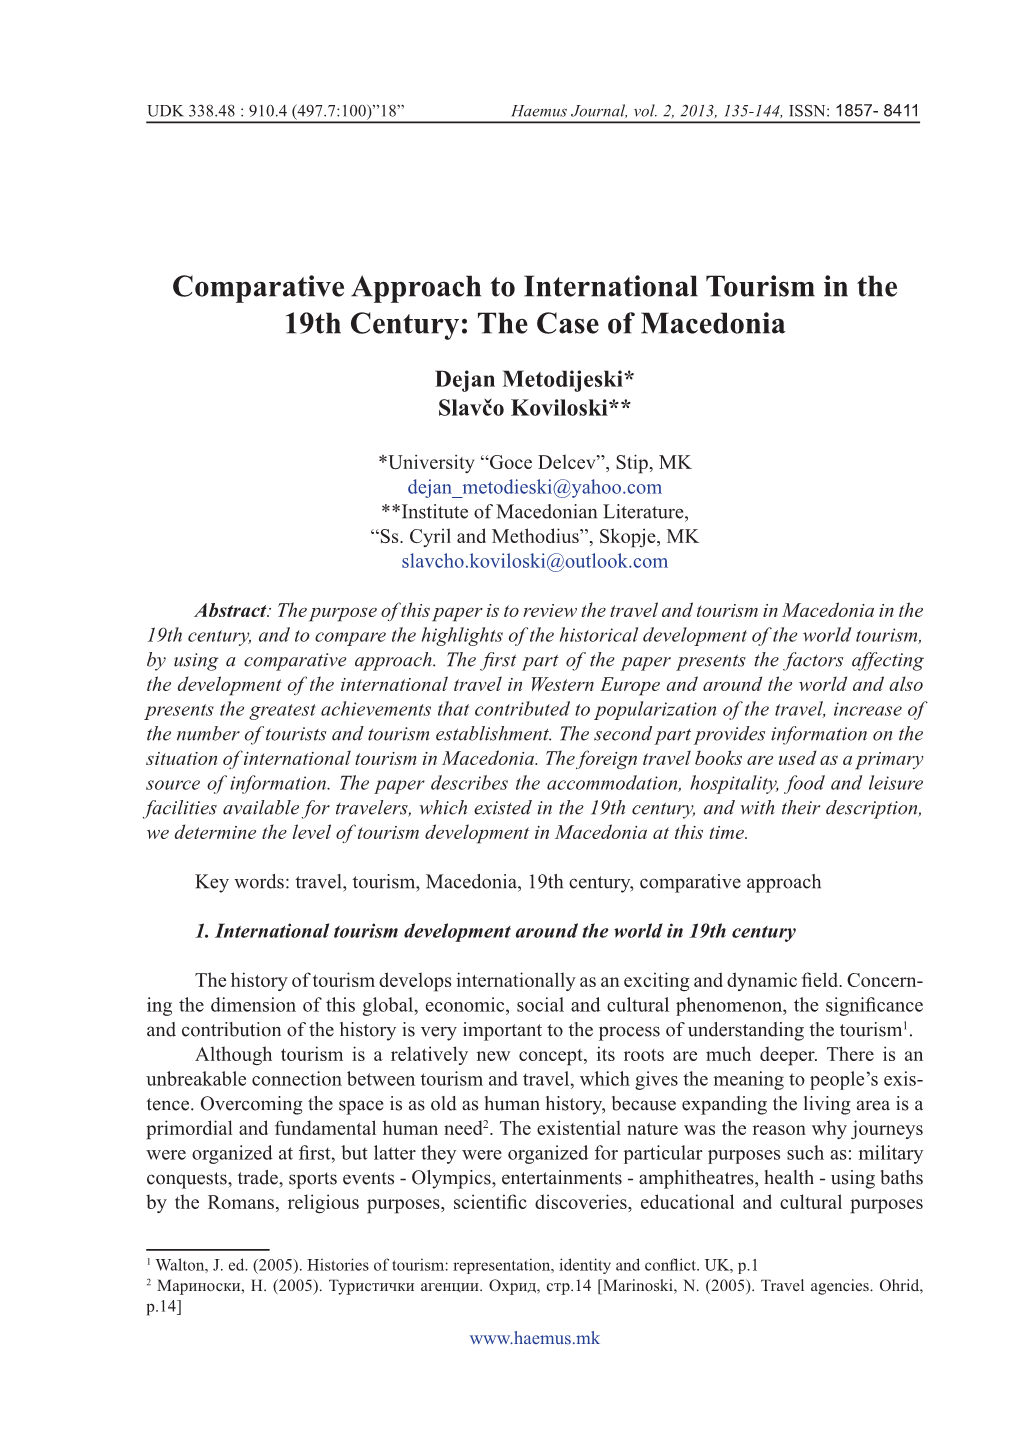 Comparative Approach to International Tourism in the 19Th Century: the Case of Macedonia